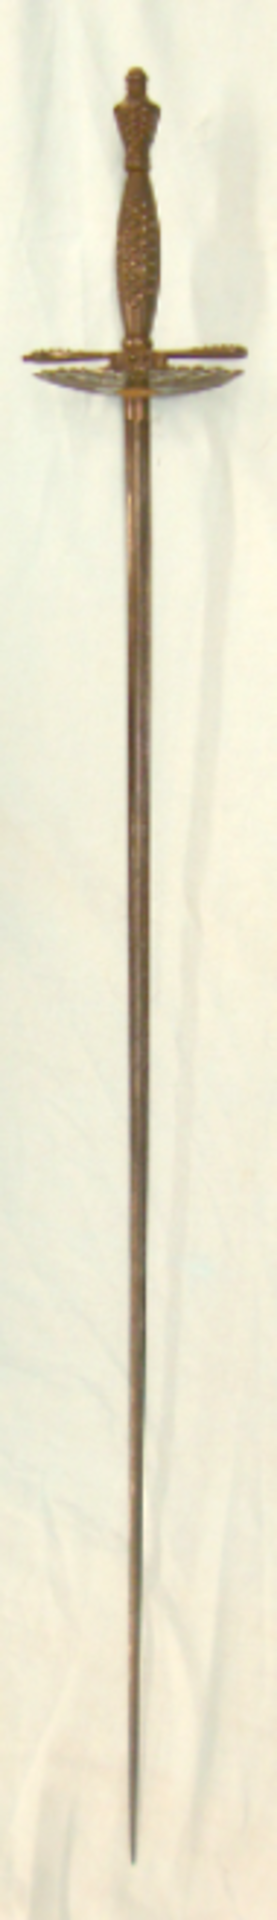 C1780 English Small Sword/ Mourning Sword By Davies & Son London.